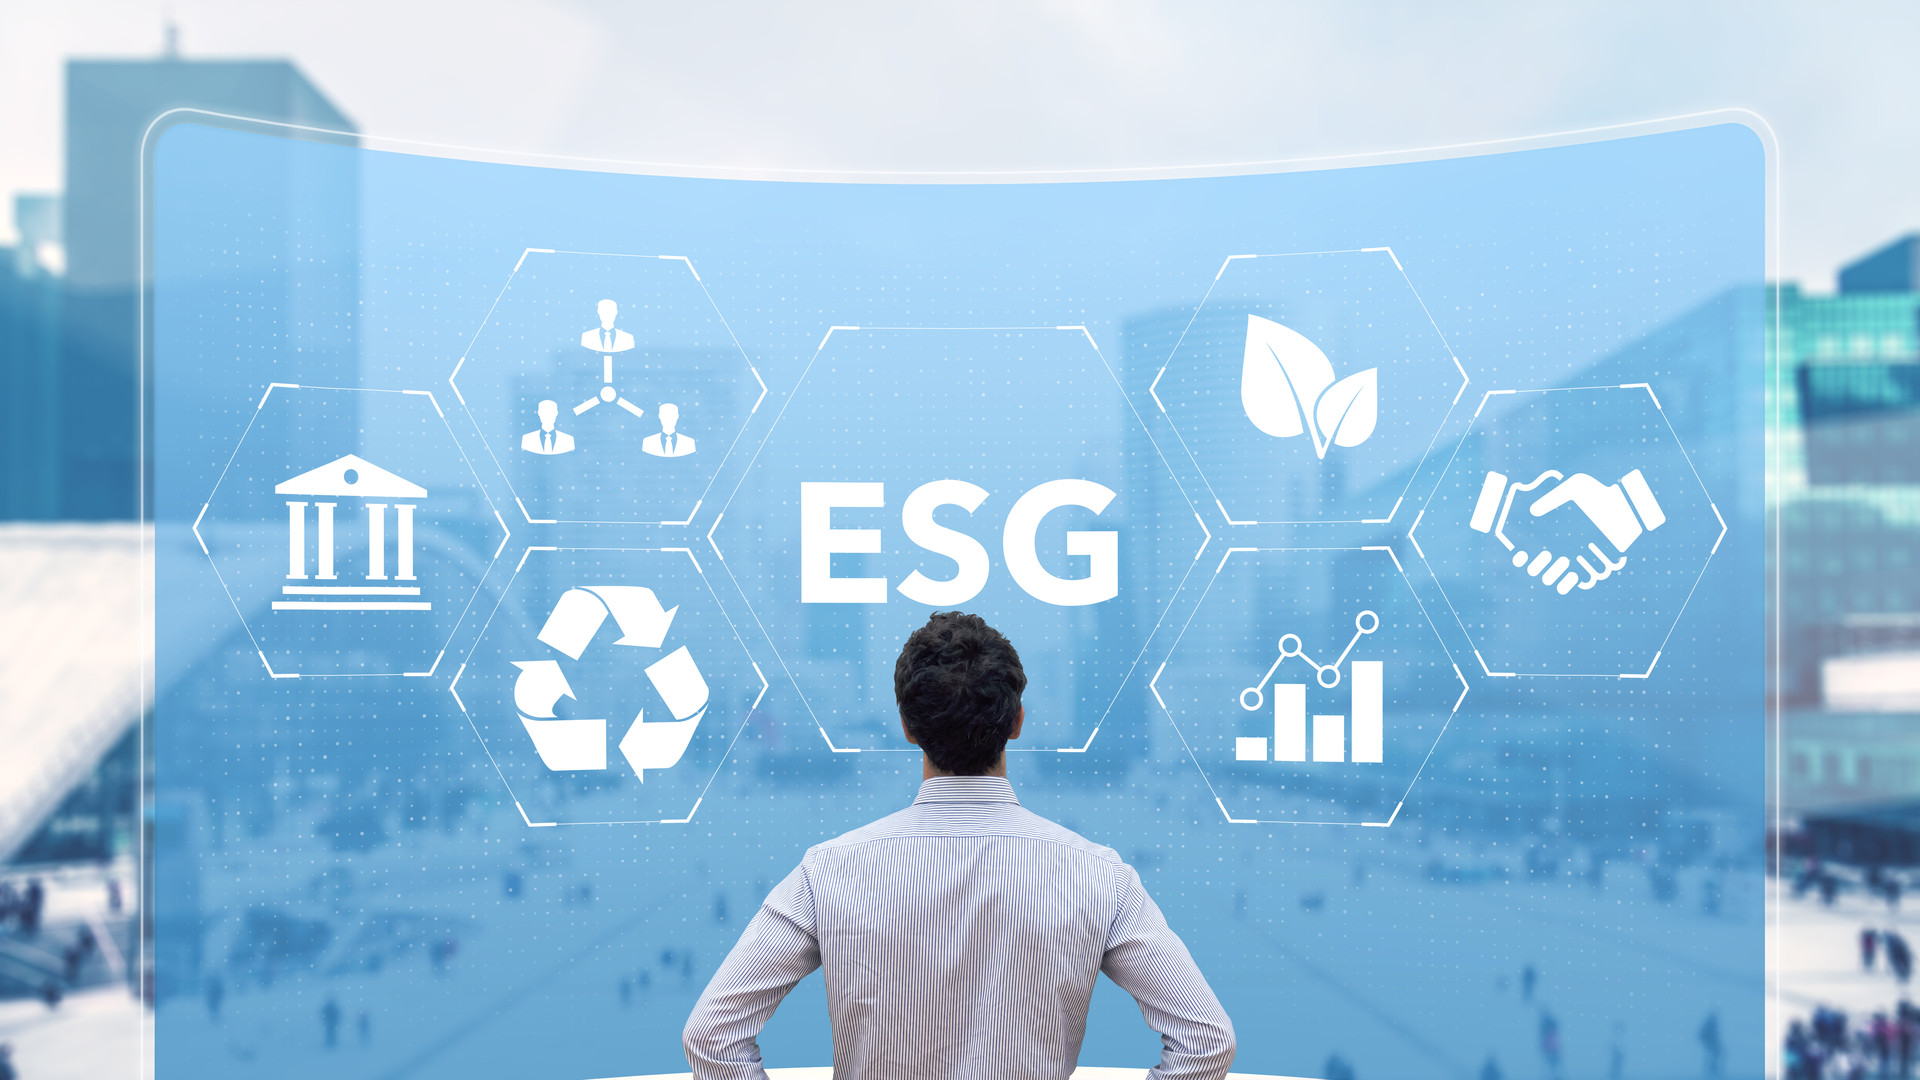 ESG Environmental Social Governance sustainable development and investment evaluation. Green ethical business preserving resources, reducing CO2, caring for employees. Consultant in management.